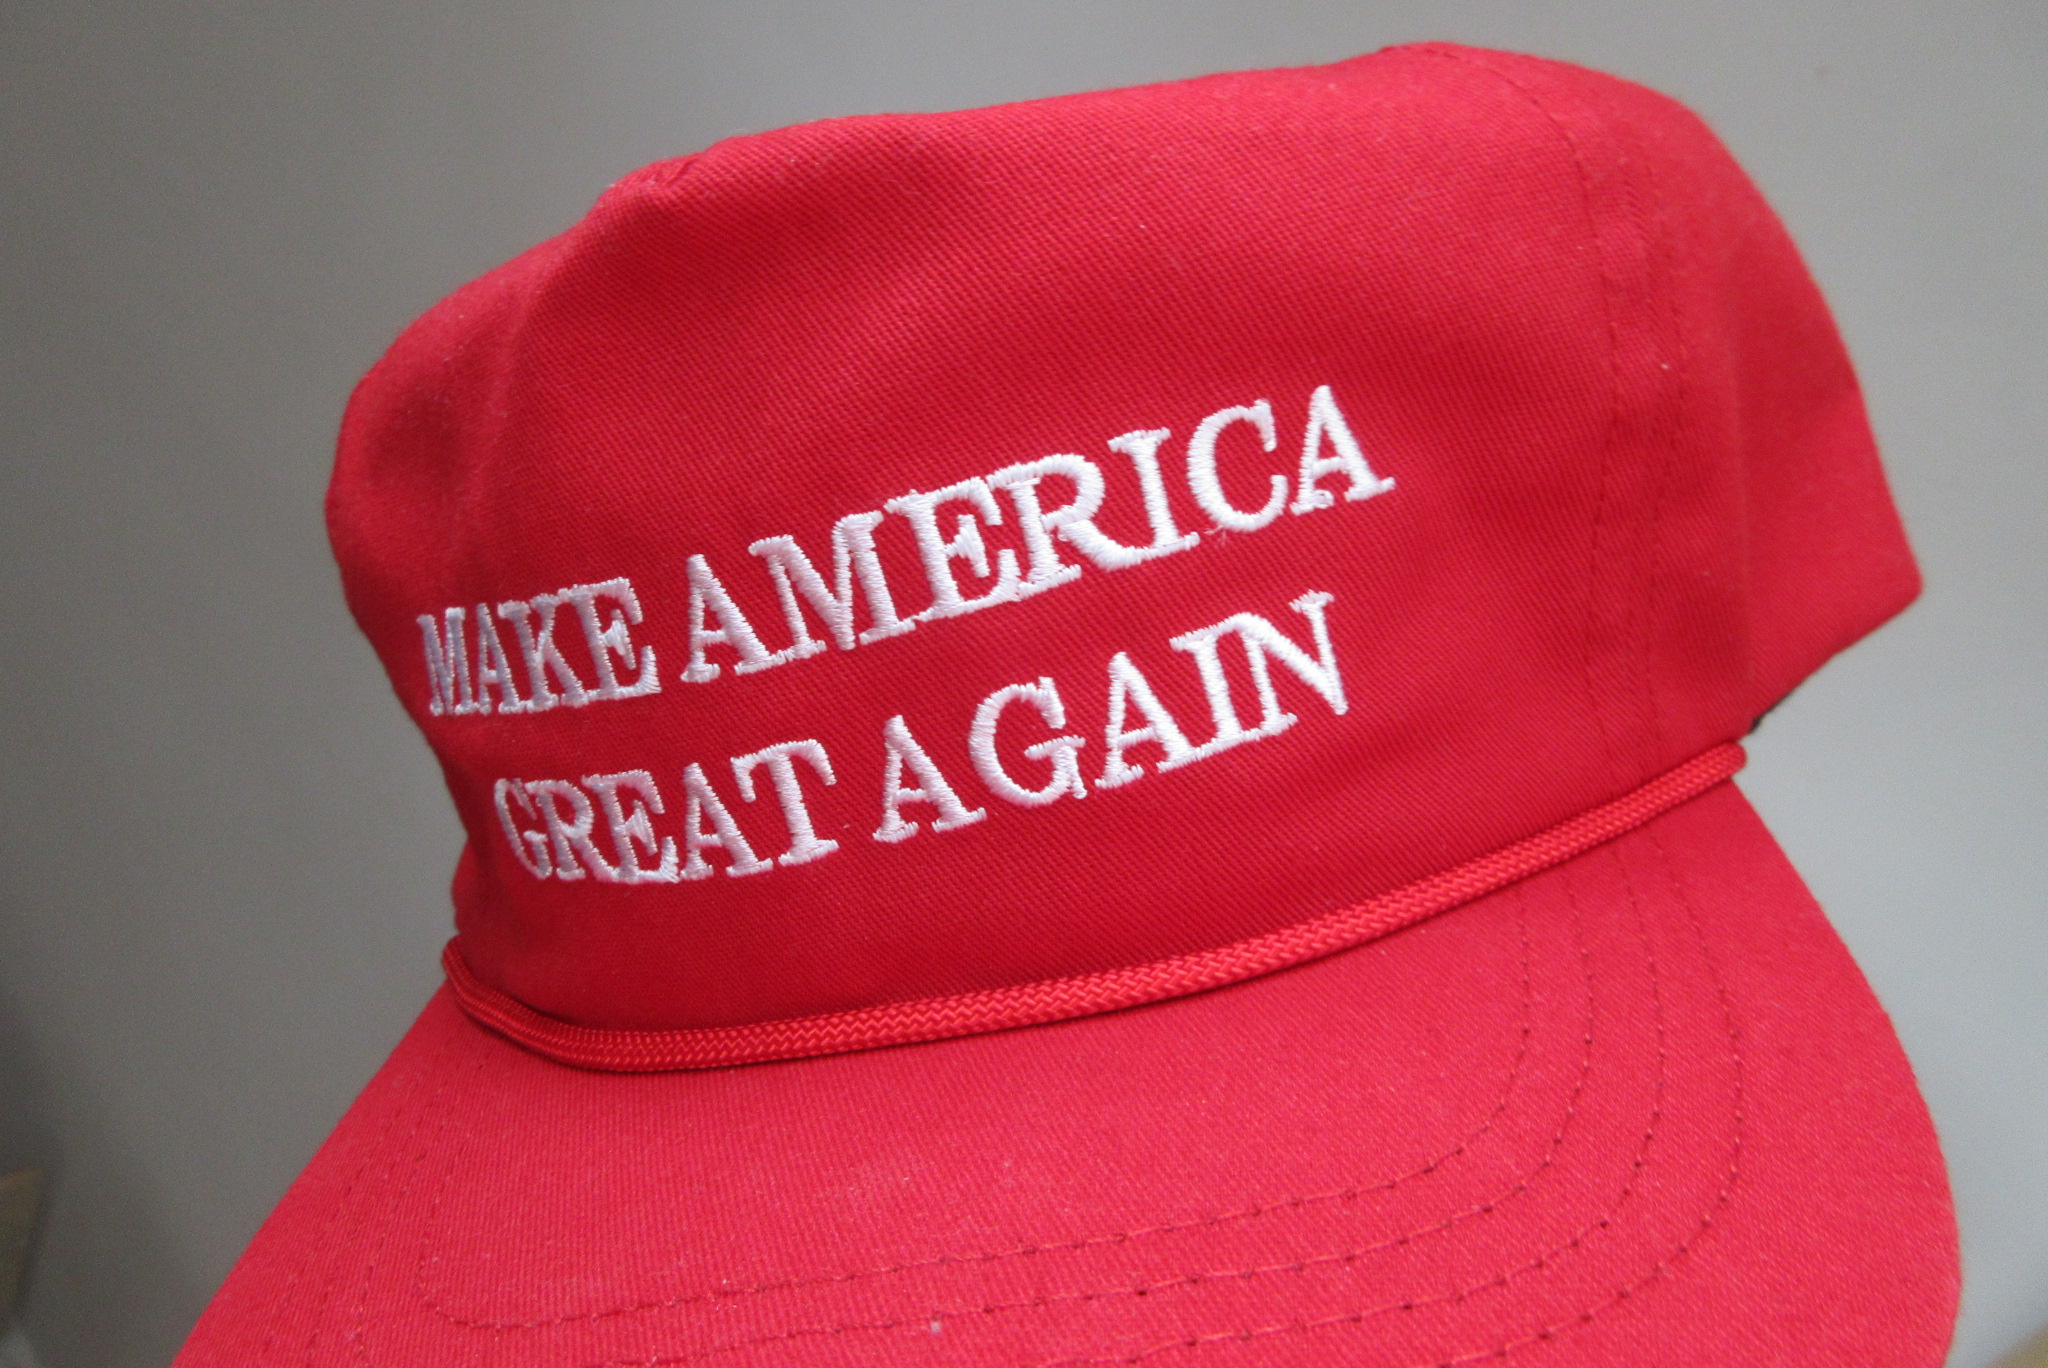 Reporter Fired for MAGA Hat Covering Donald Trump Rally - iMediaEthics.